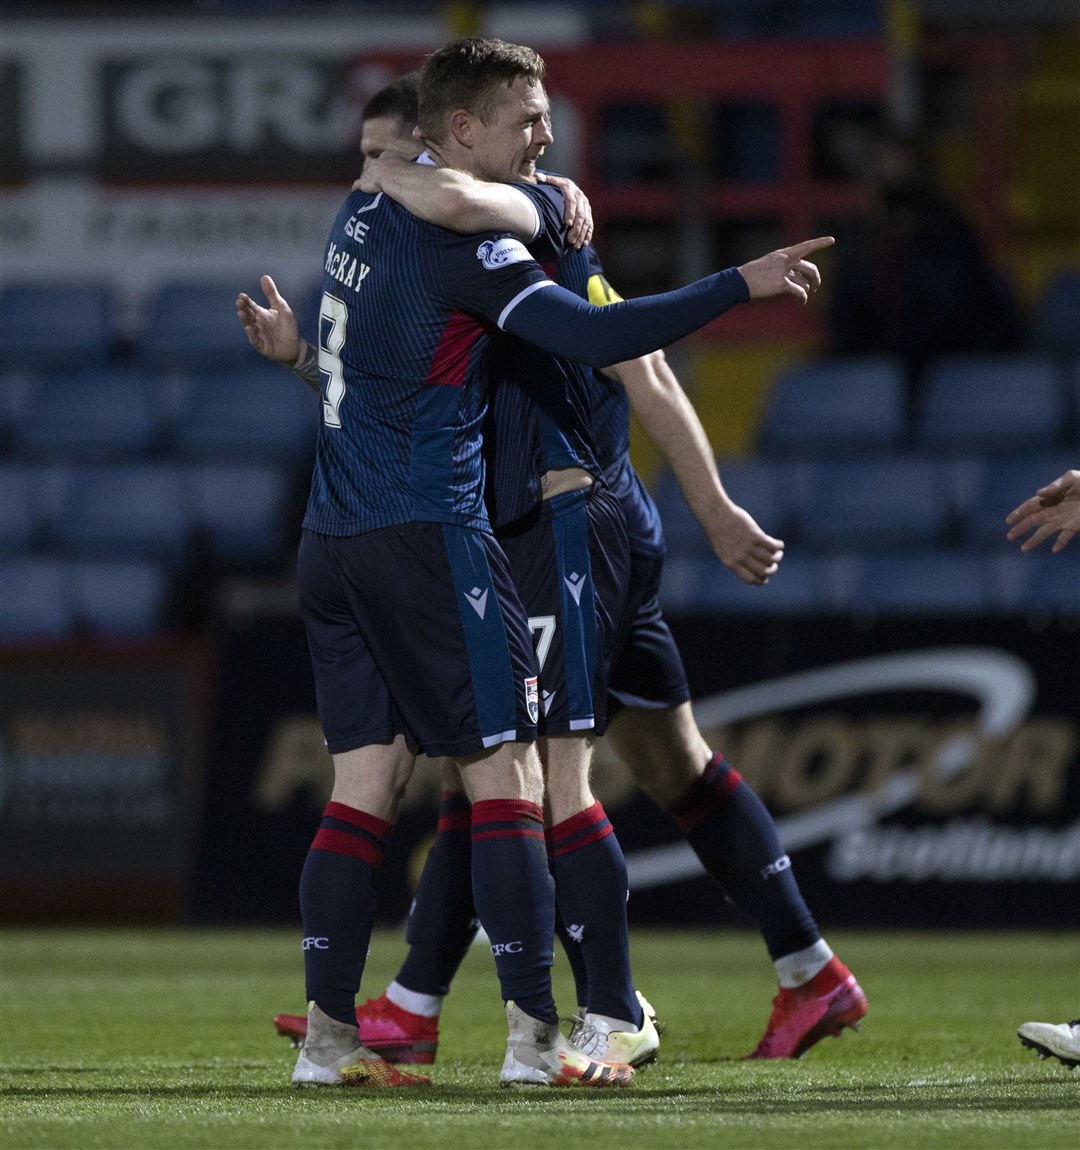 Picture - Ken Macpherson, Inverness. Scottish Cup 3rd Round. Ross County(1) v Inverness CT(3). 02.04.21. Ross County's Billy McKay celebrates his goal.